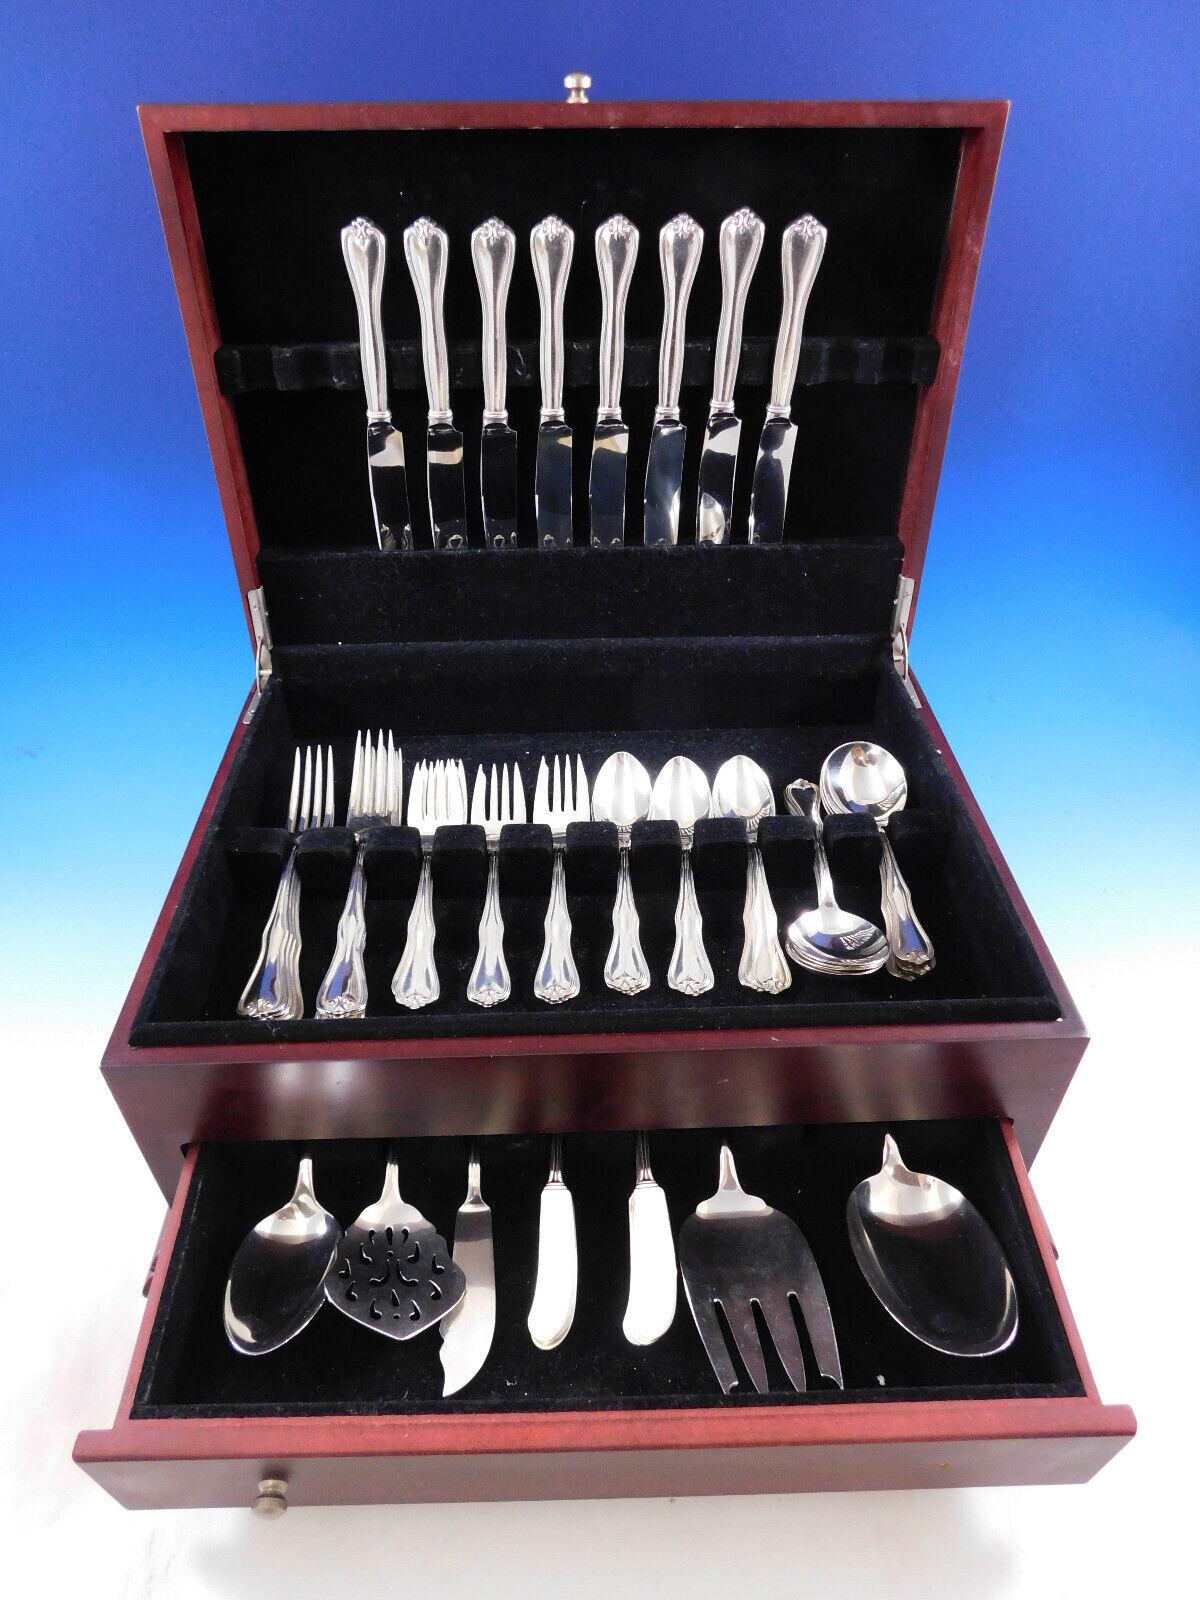 Mount Vernon by Watson, c1907, sterling silver Flatware set, 53 pieces. This set includes:

8 Regular Knives, 9